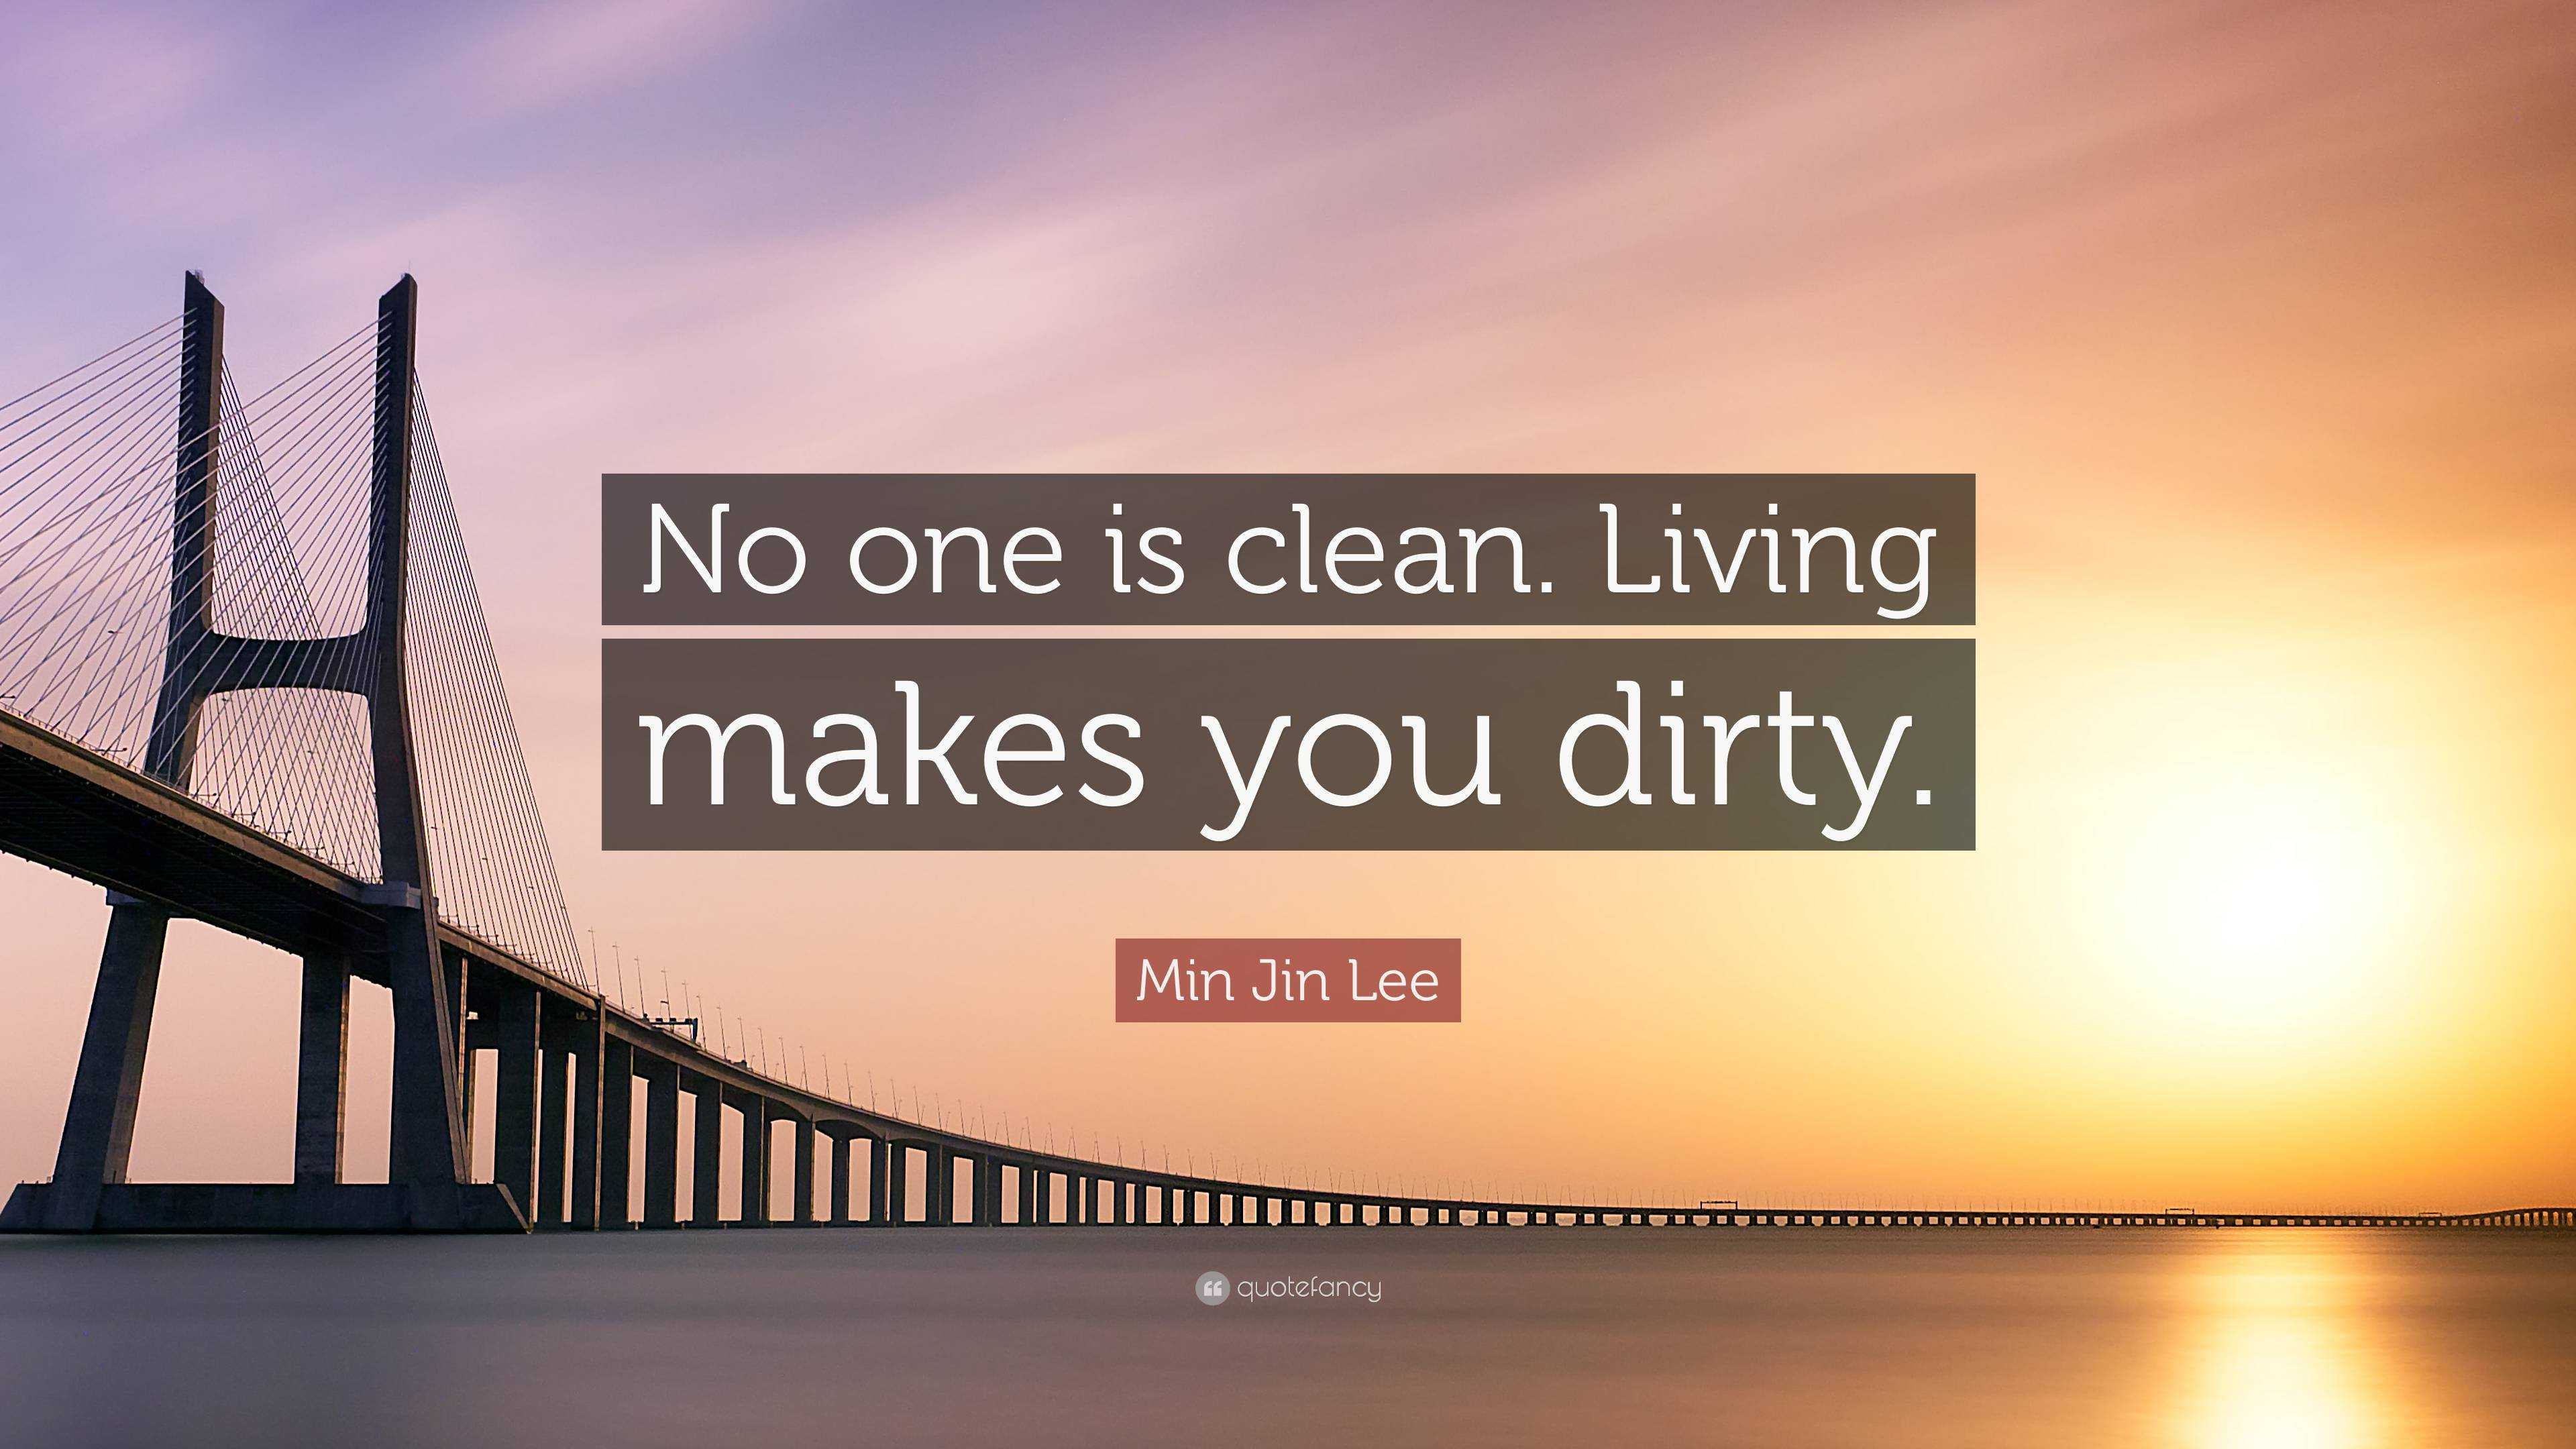 Min Jin Lee Quote: “No one is clean. Living makes you dirty.”